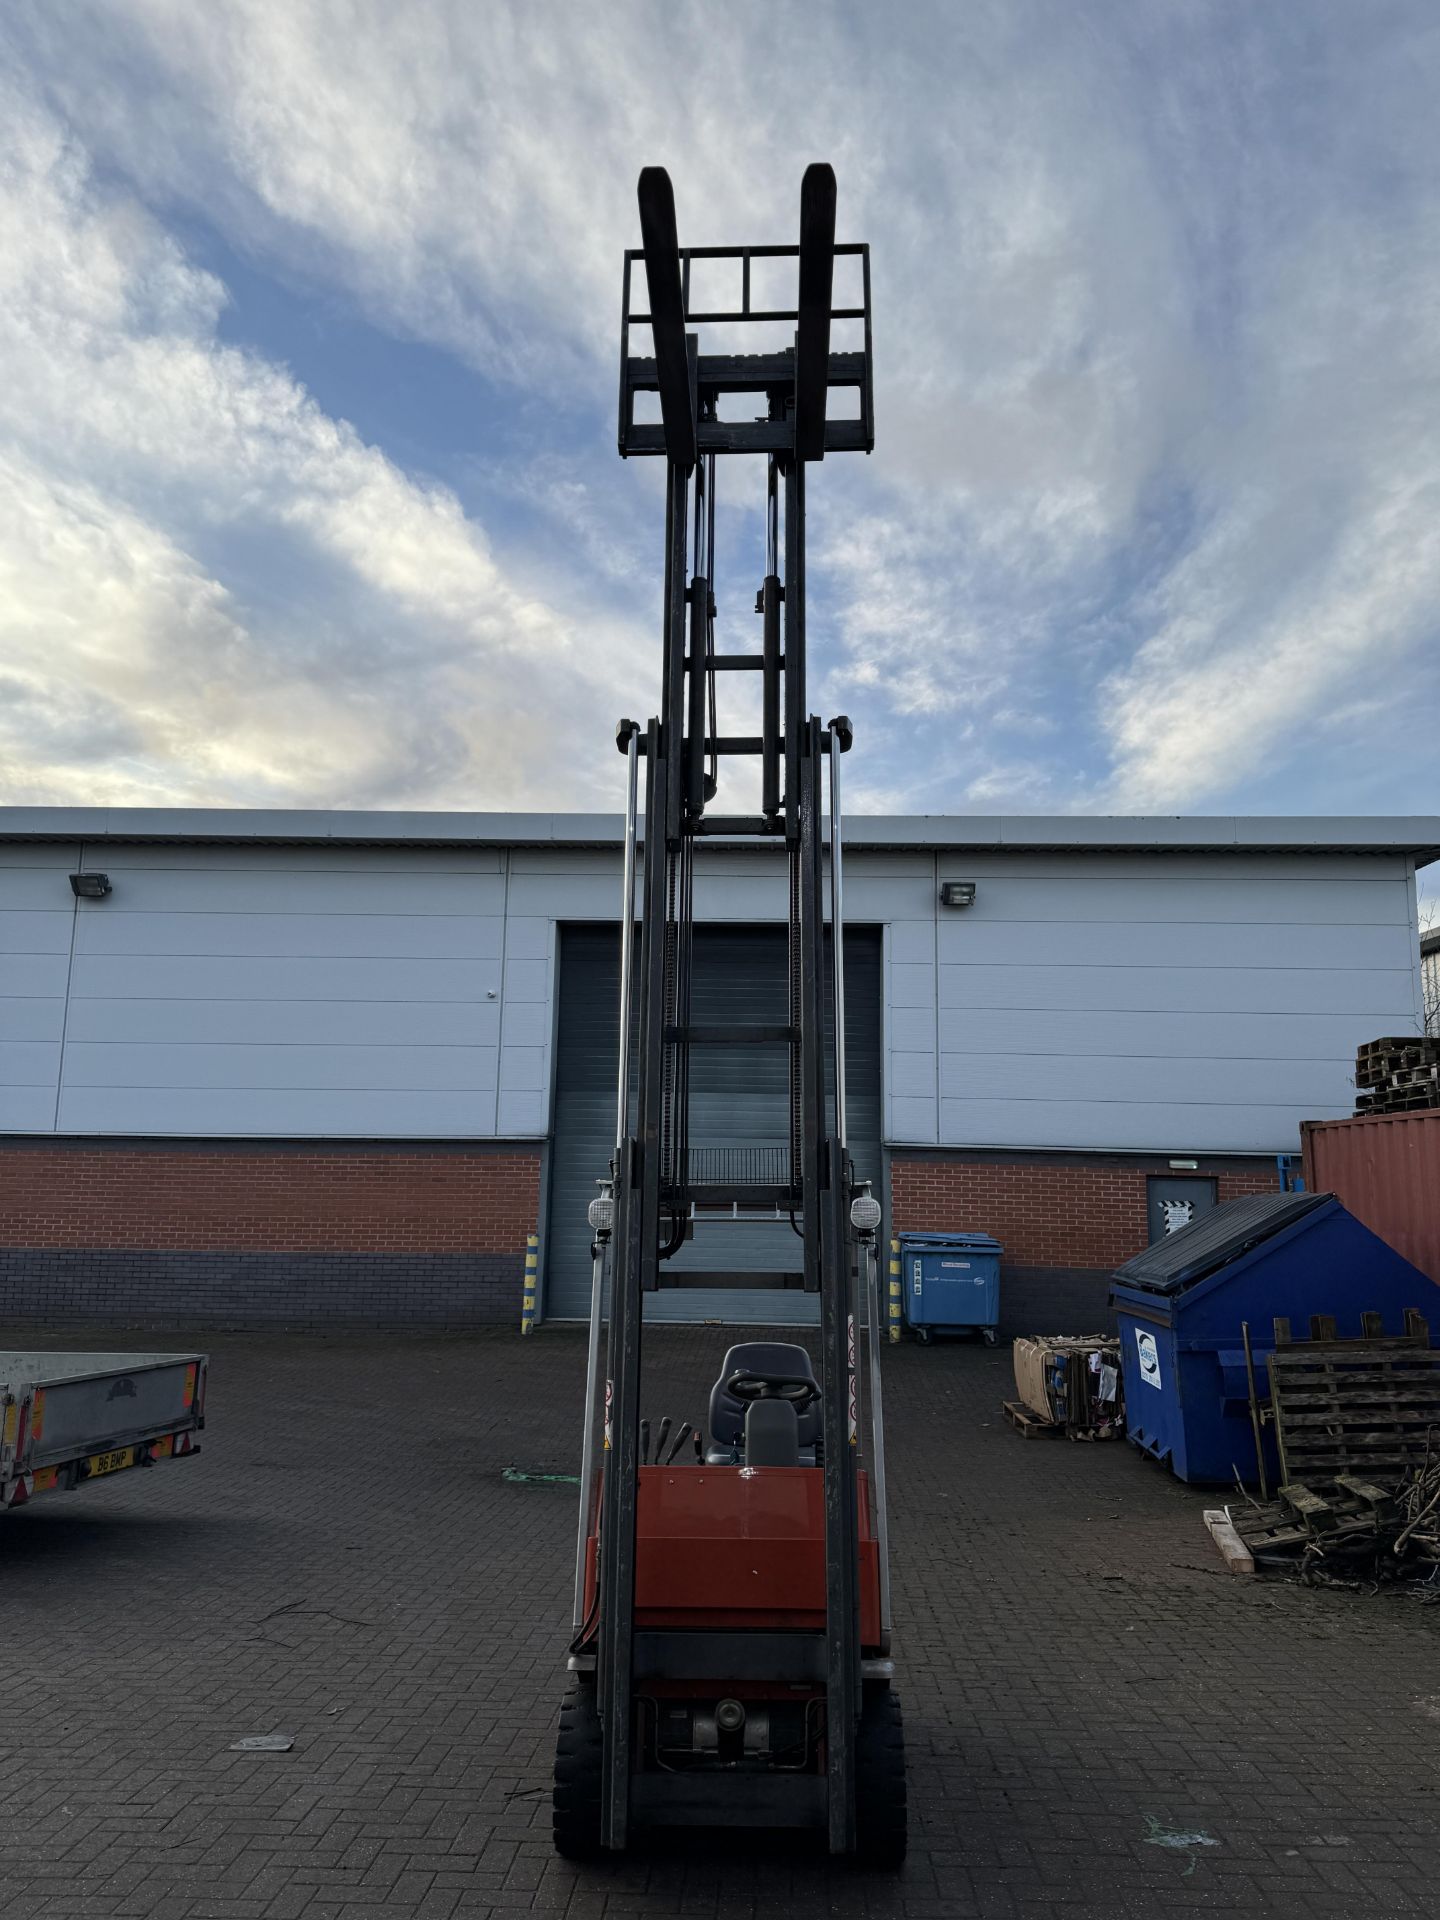 Cargo Model C 3 E 150 Tri Wheel Container Specification Electric Reach Truck - Image 15 of 28